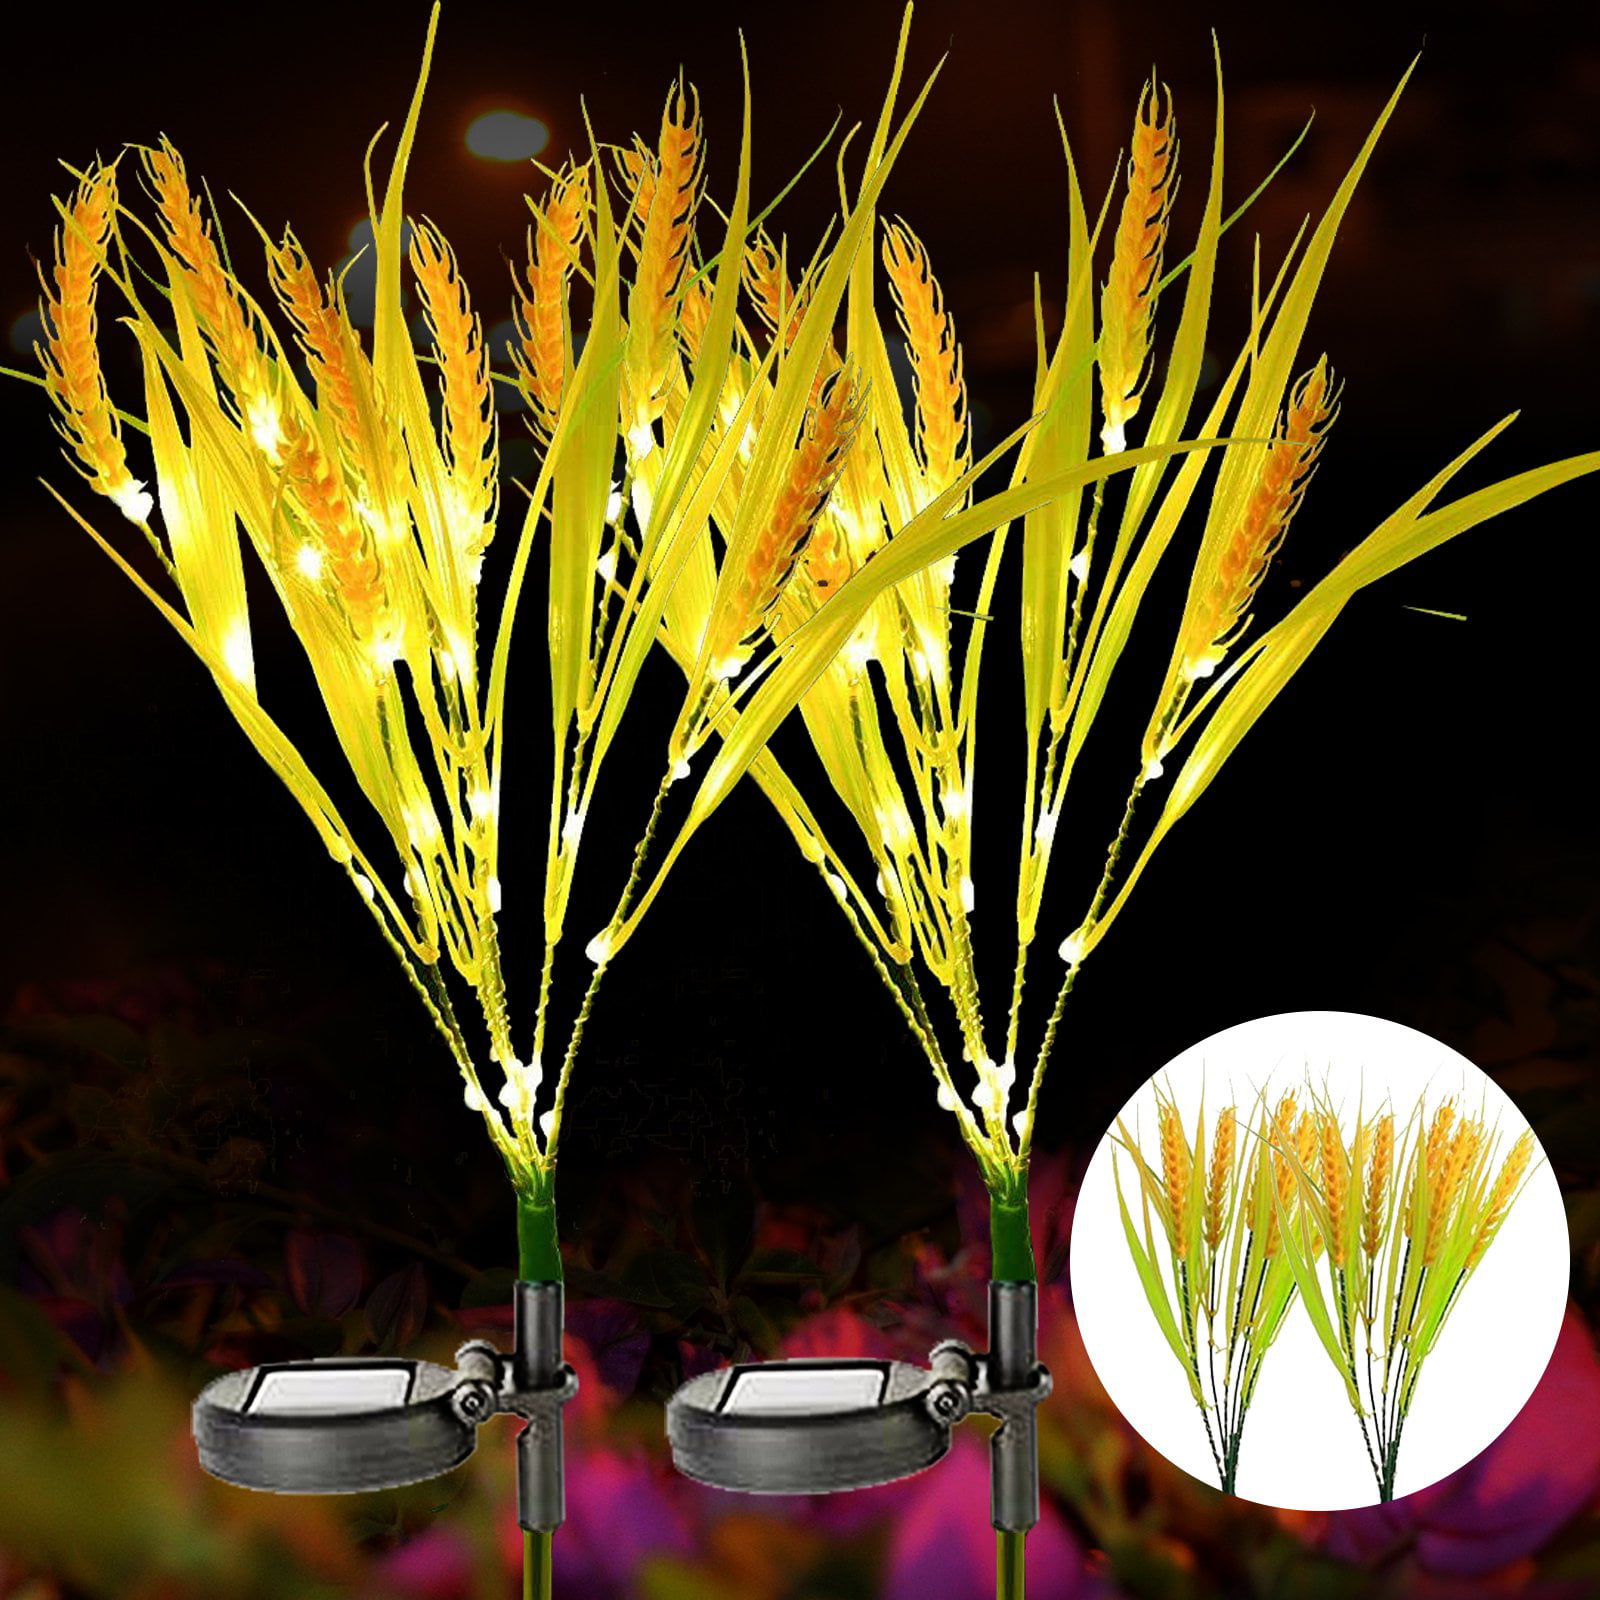 Details about   Solar Powered Wheat Ear Flower LED Lights Garden Stake Lamp Yard Outdoor Decor 